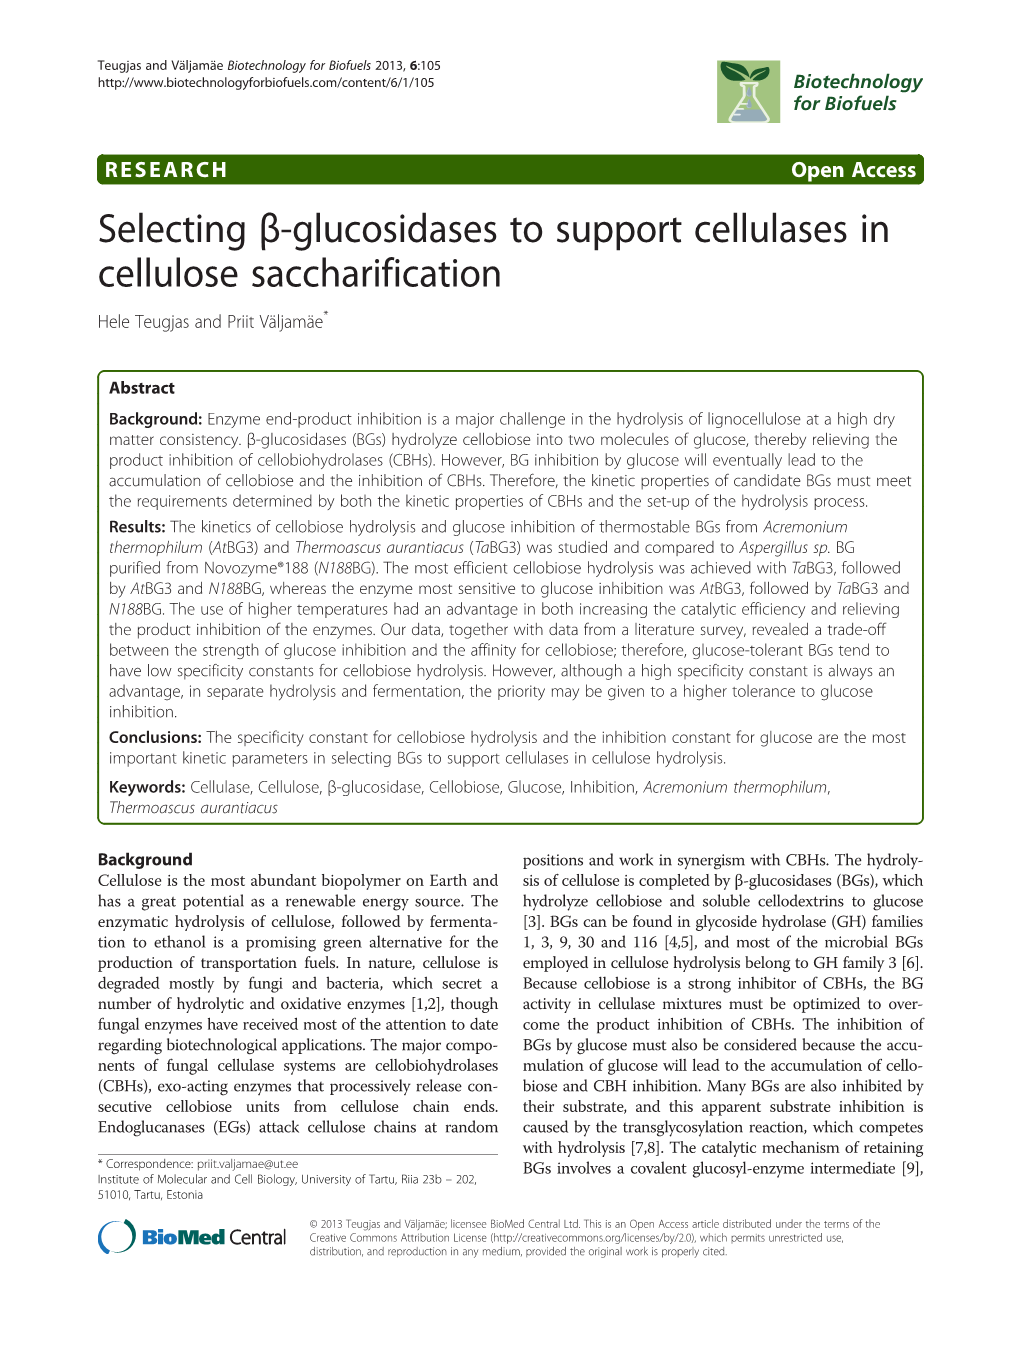 Selecting Β-Glucosidases to Support Cellulases in Cellulose Saccharification Hele Teugjas and Priit Väljamäe*